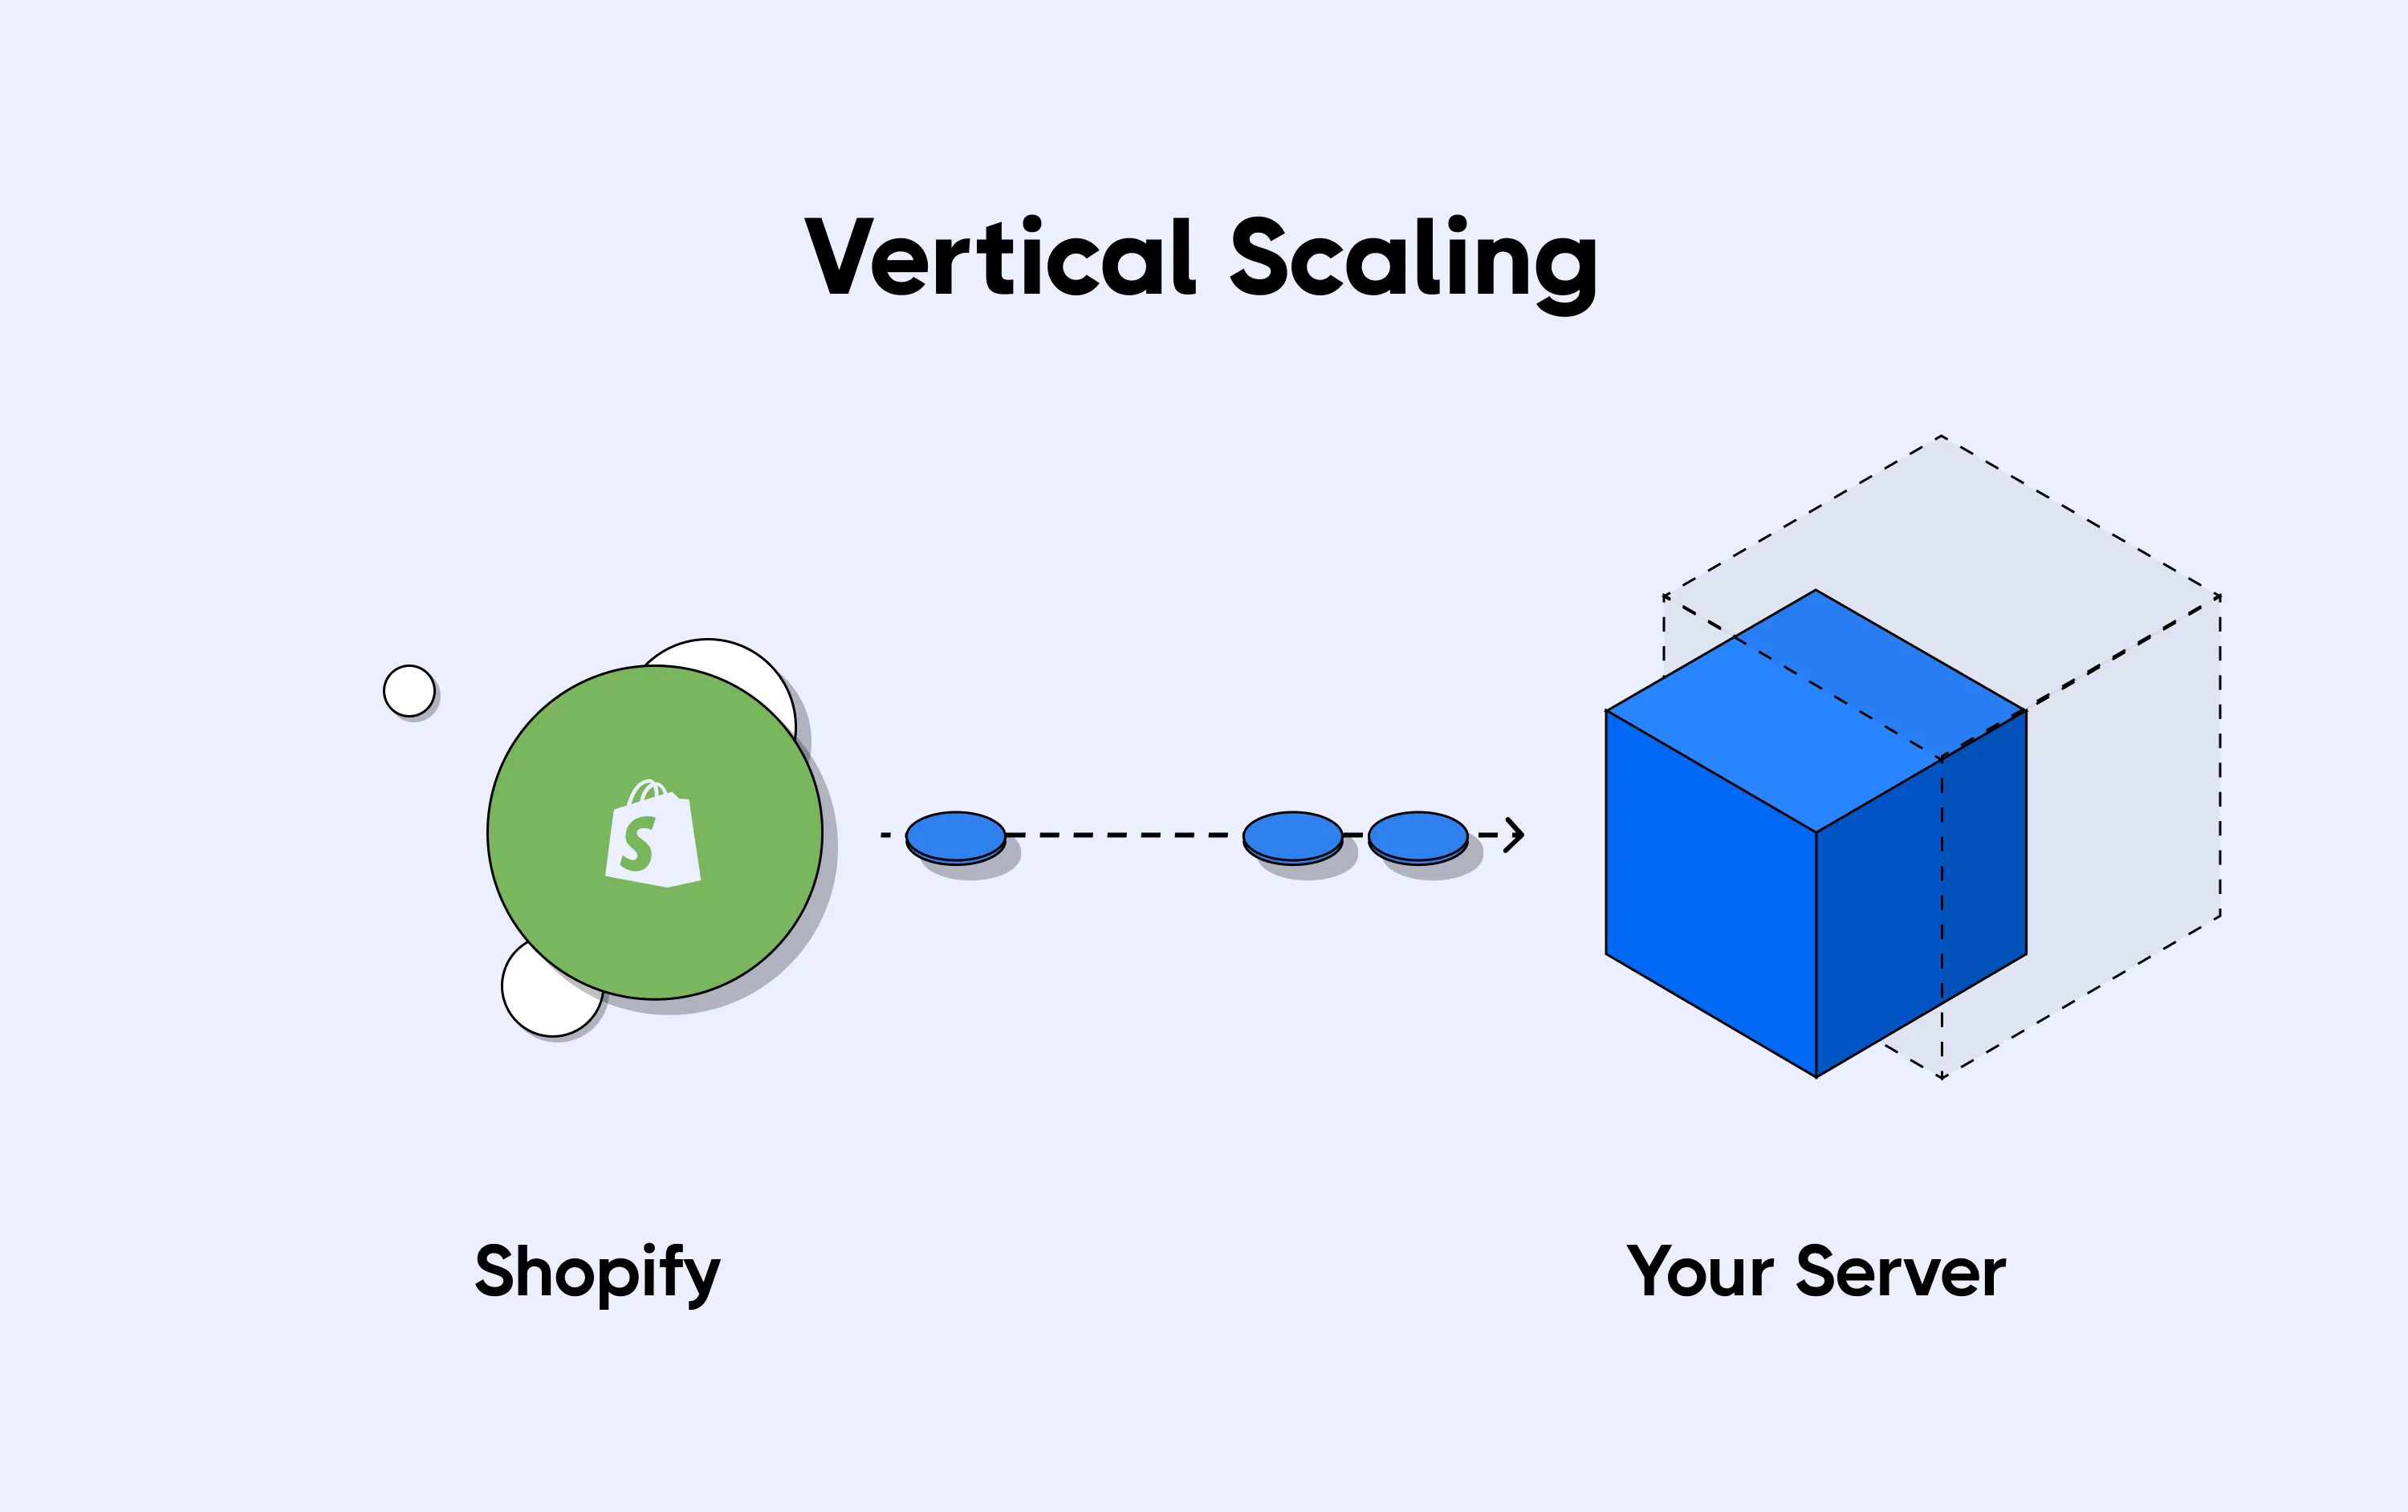 Increasing the capacity of the server (vertical scaling)